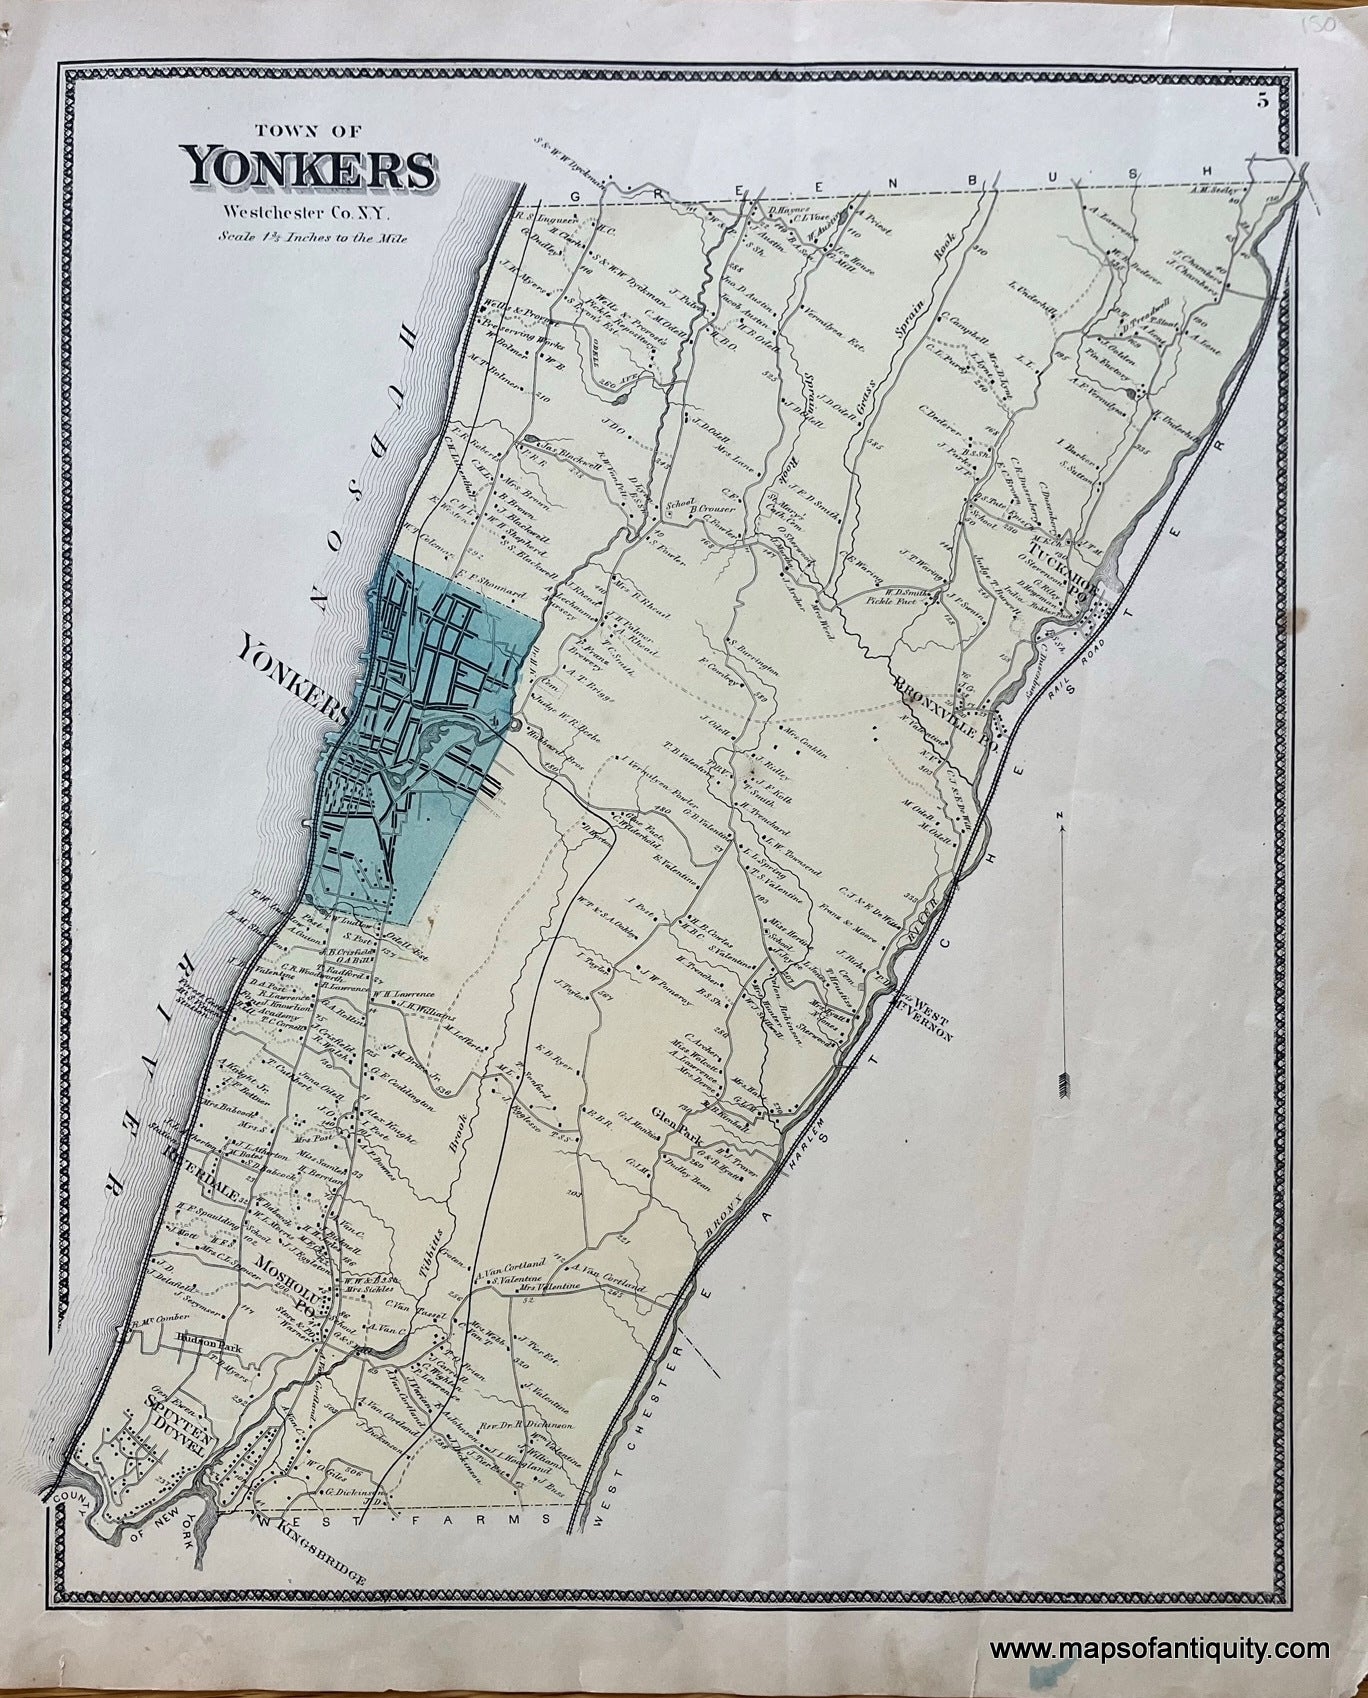 Antique-Map-Town-of-Yonkers-Westchester-Co.-N.Y.-NY-New-York-Maps-of-Antiquity